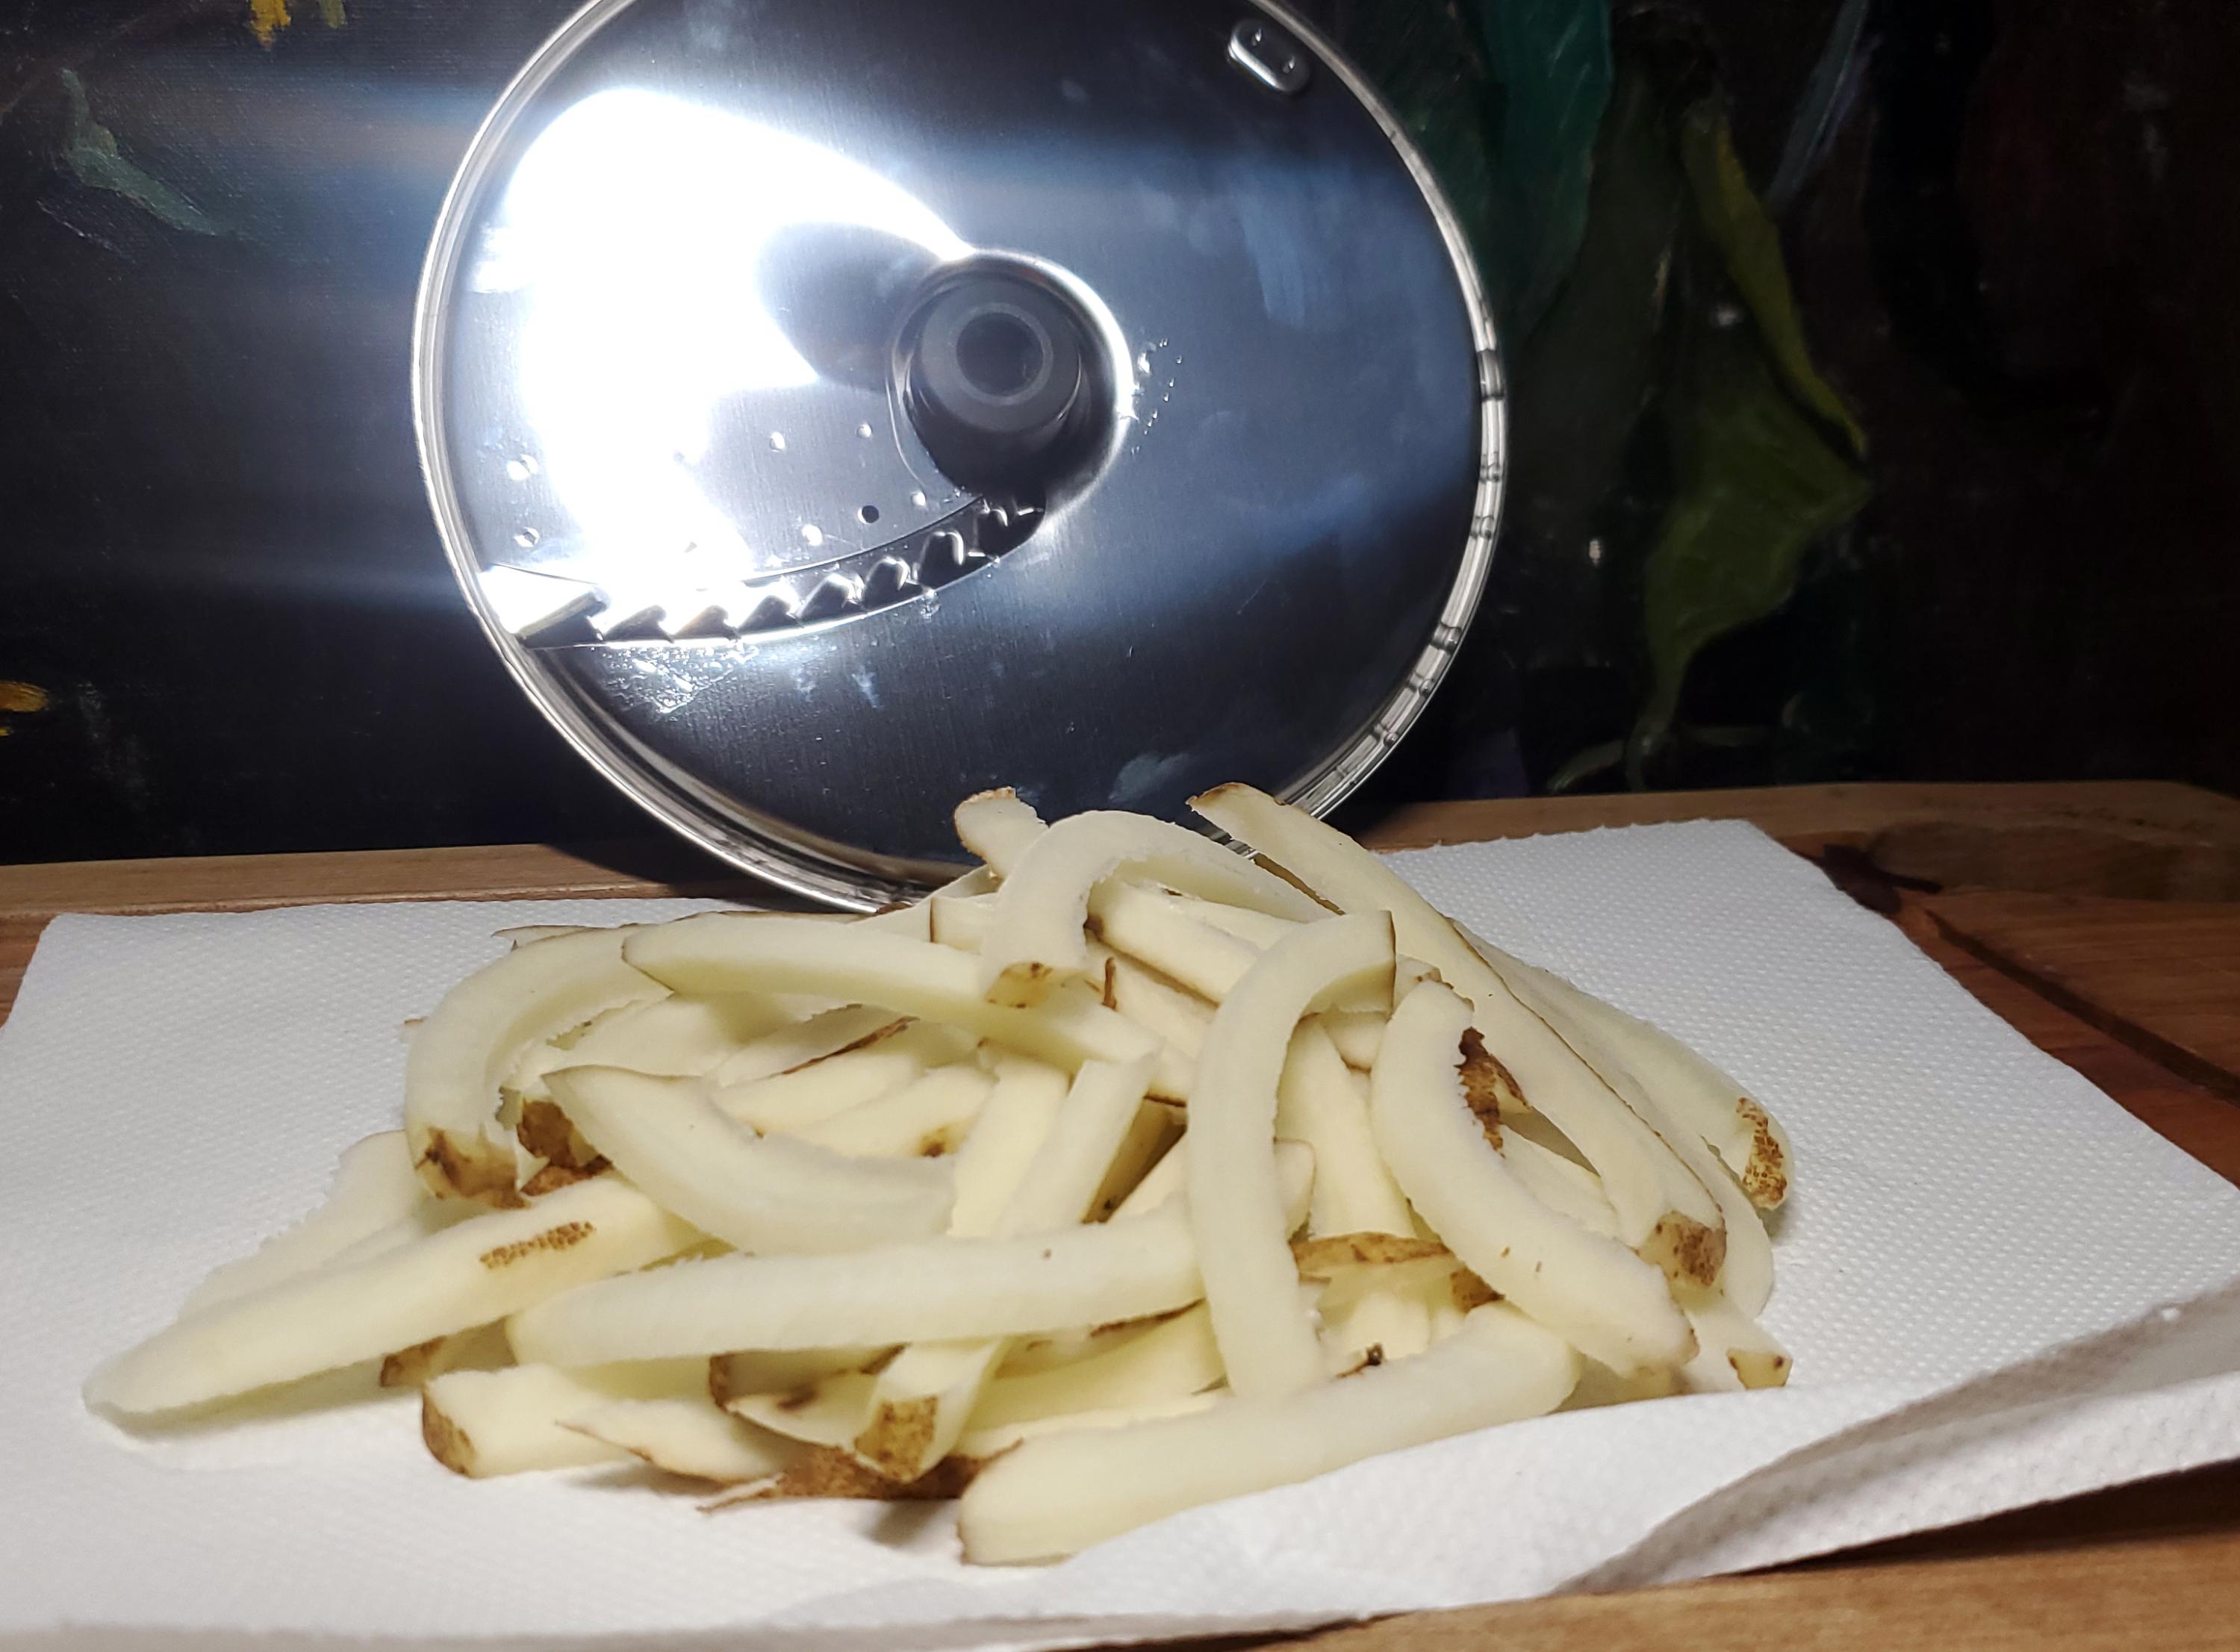 What to do with (really) dried lemon slices? - Kitchen Consumer - eGullet  Forums